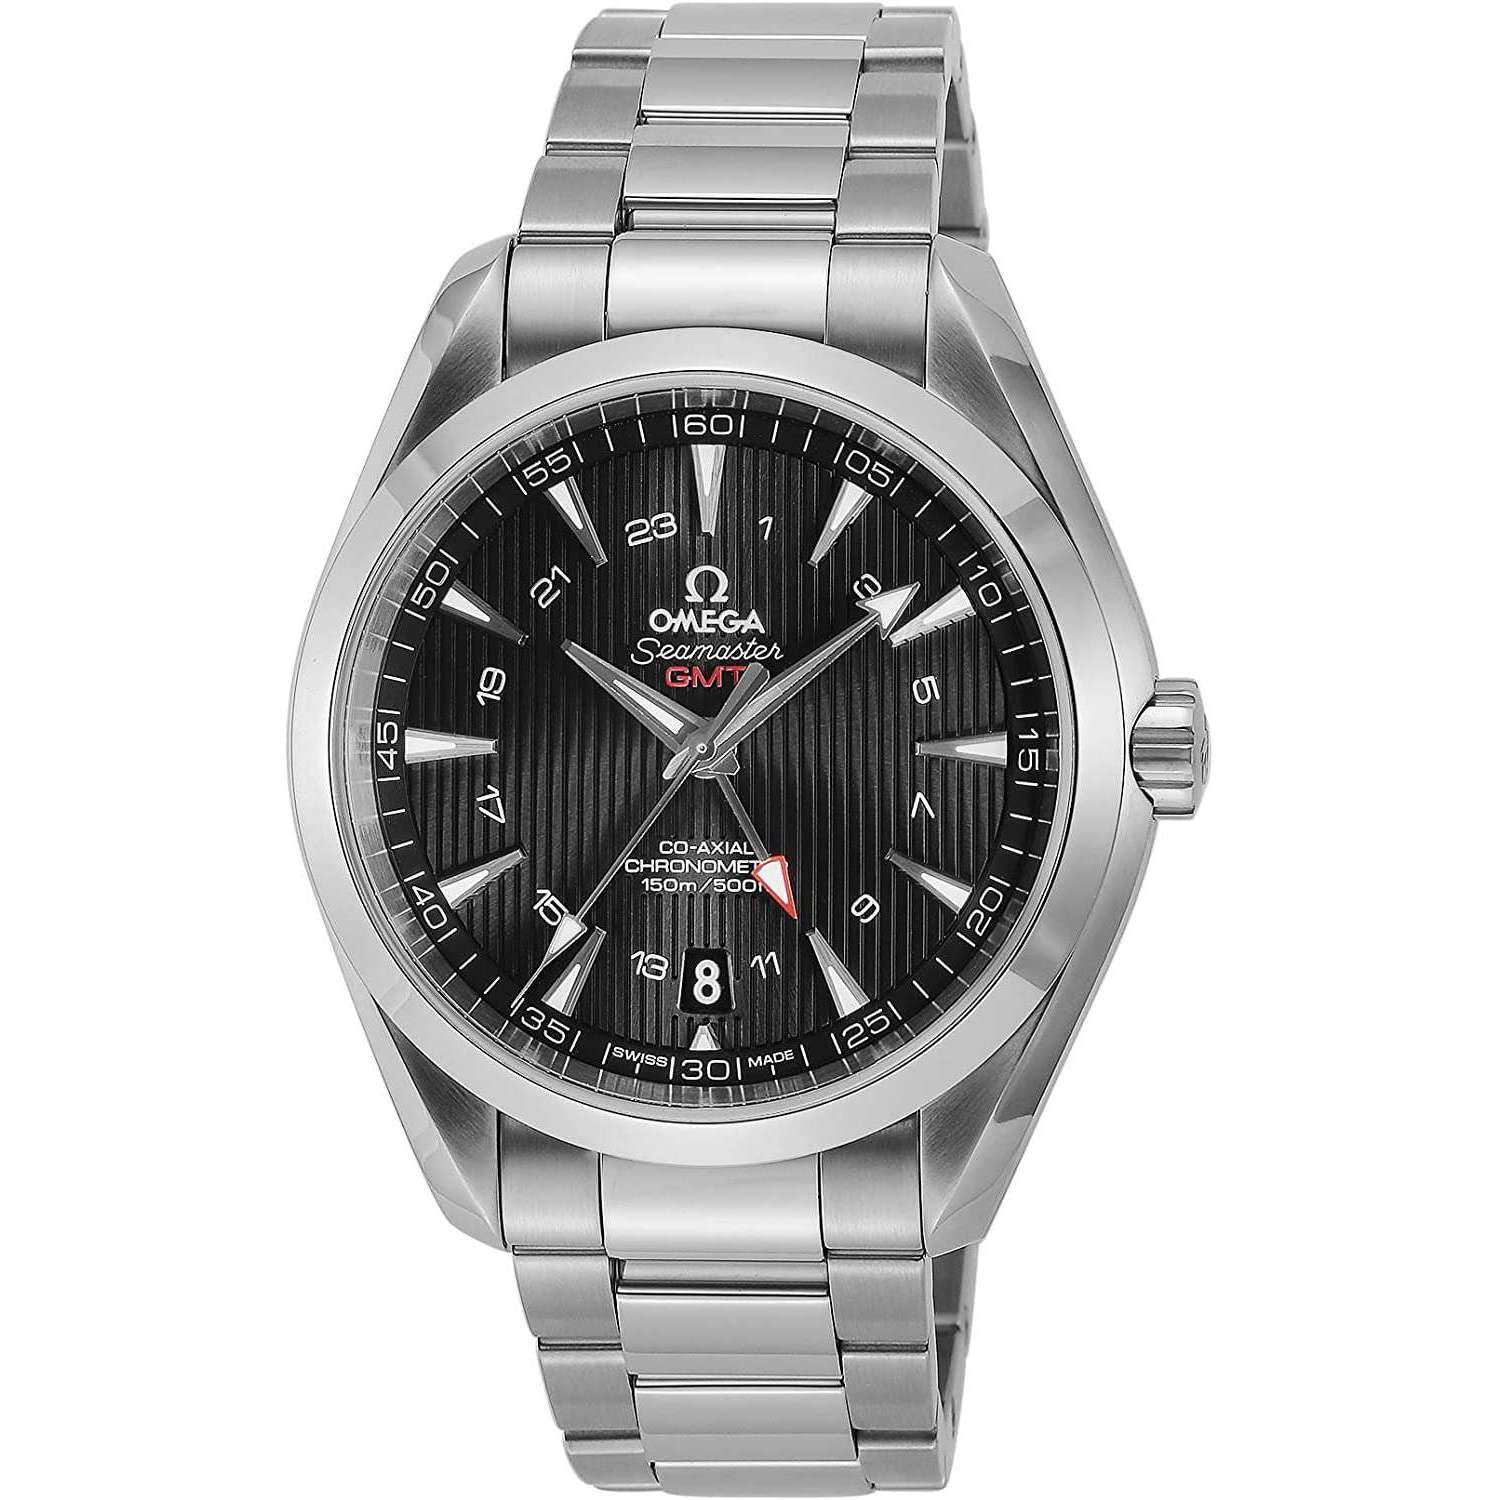 OMEGA SEAMASTER GMT CO-AXIAL CHRONOMETER 43 MM MEN WATCH 231.10.43.22.01.001 - ROOK JAPAN